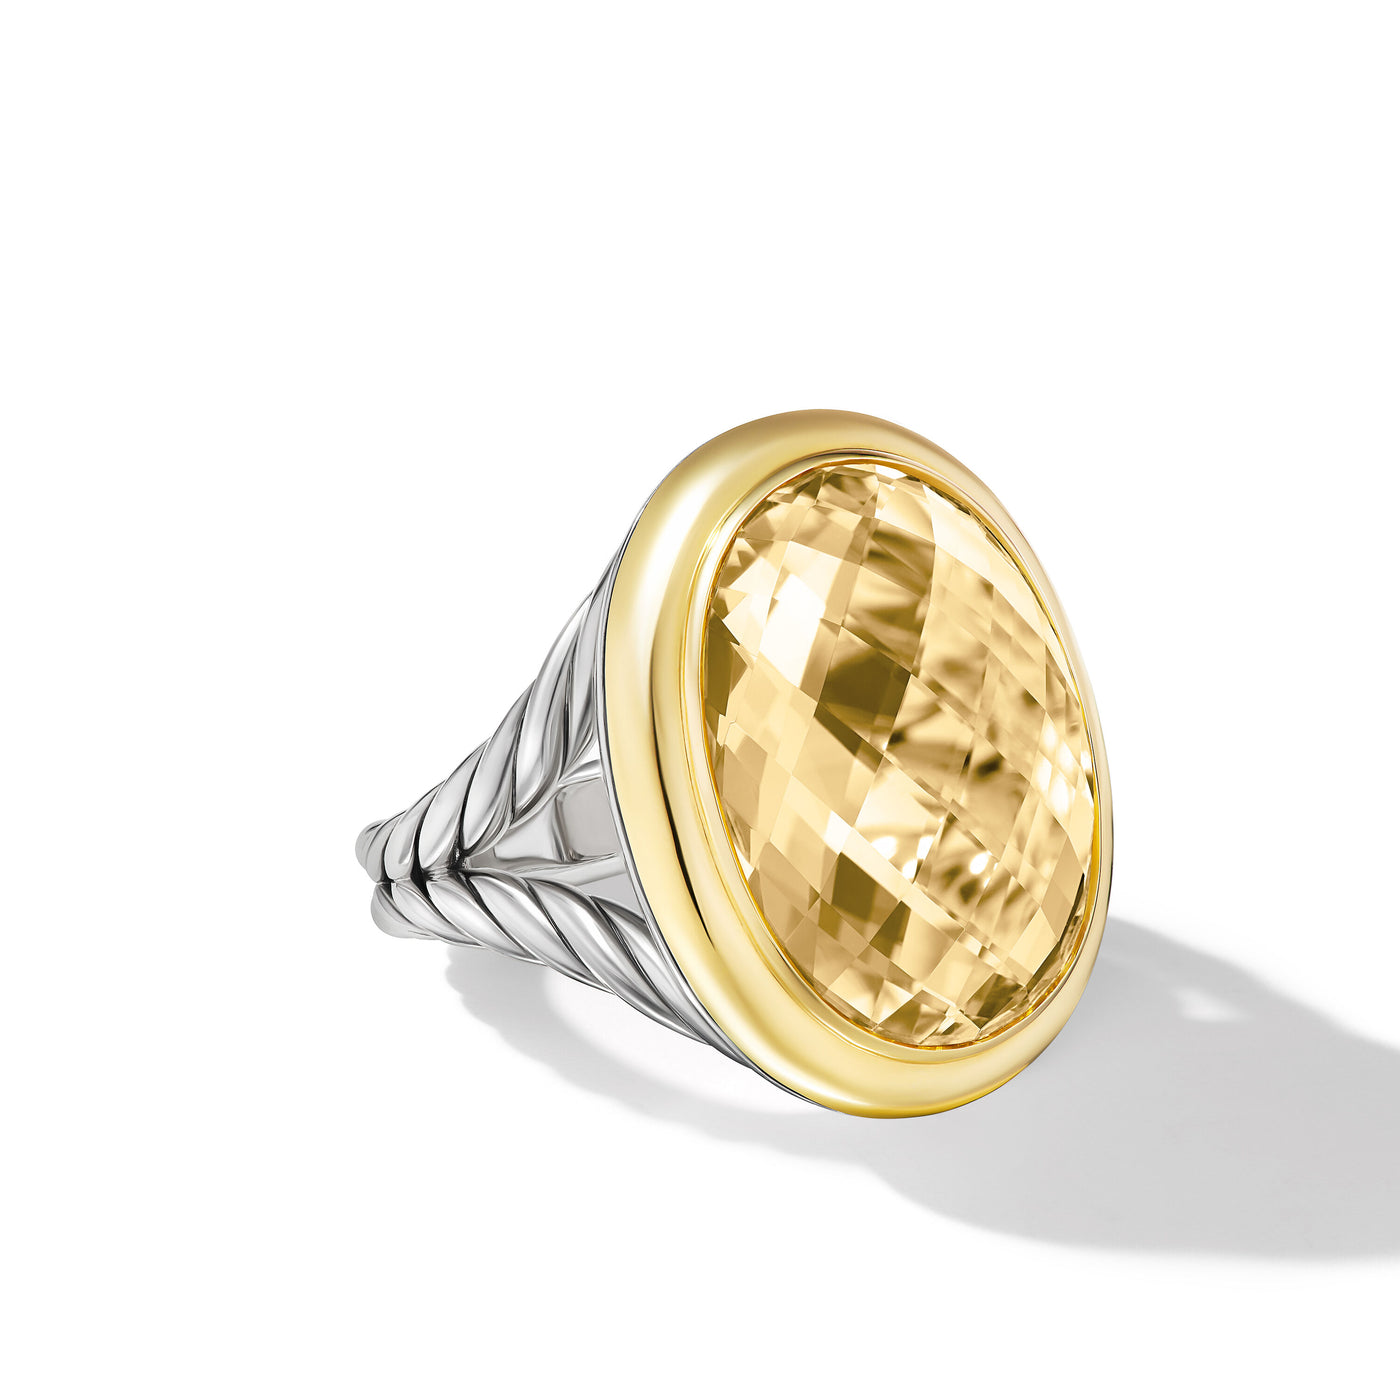 Albion® Oval Ring in Sterling Silver with 18K Yellow Gold and Champagne Citrine\, 21mm